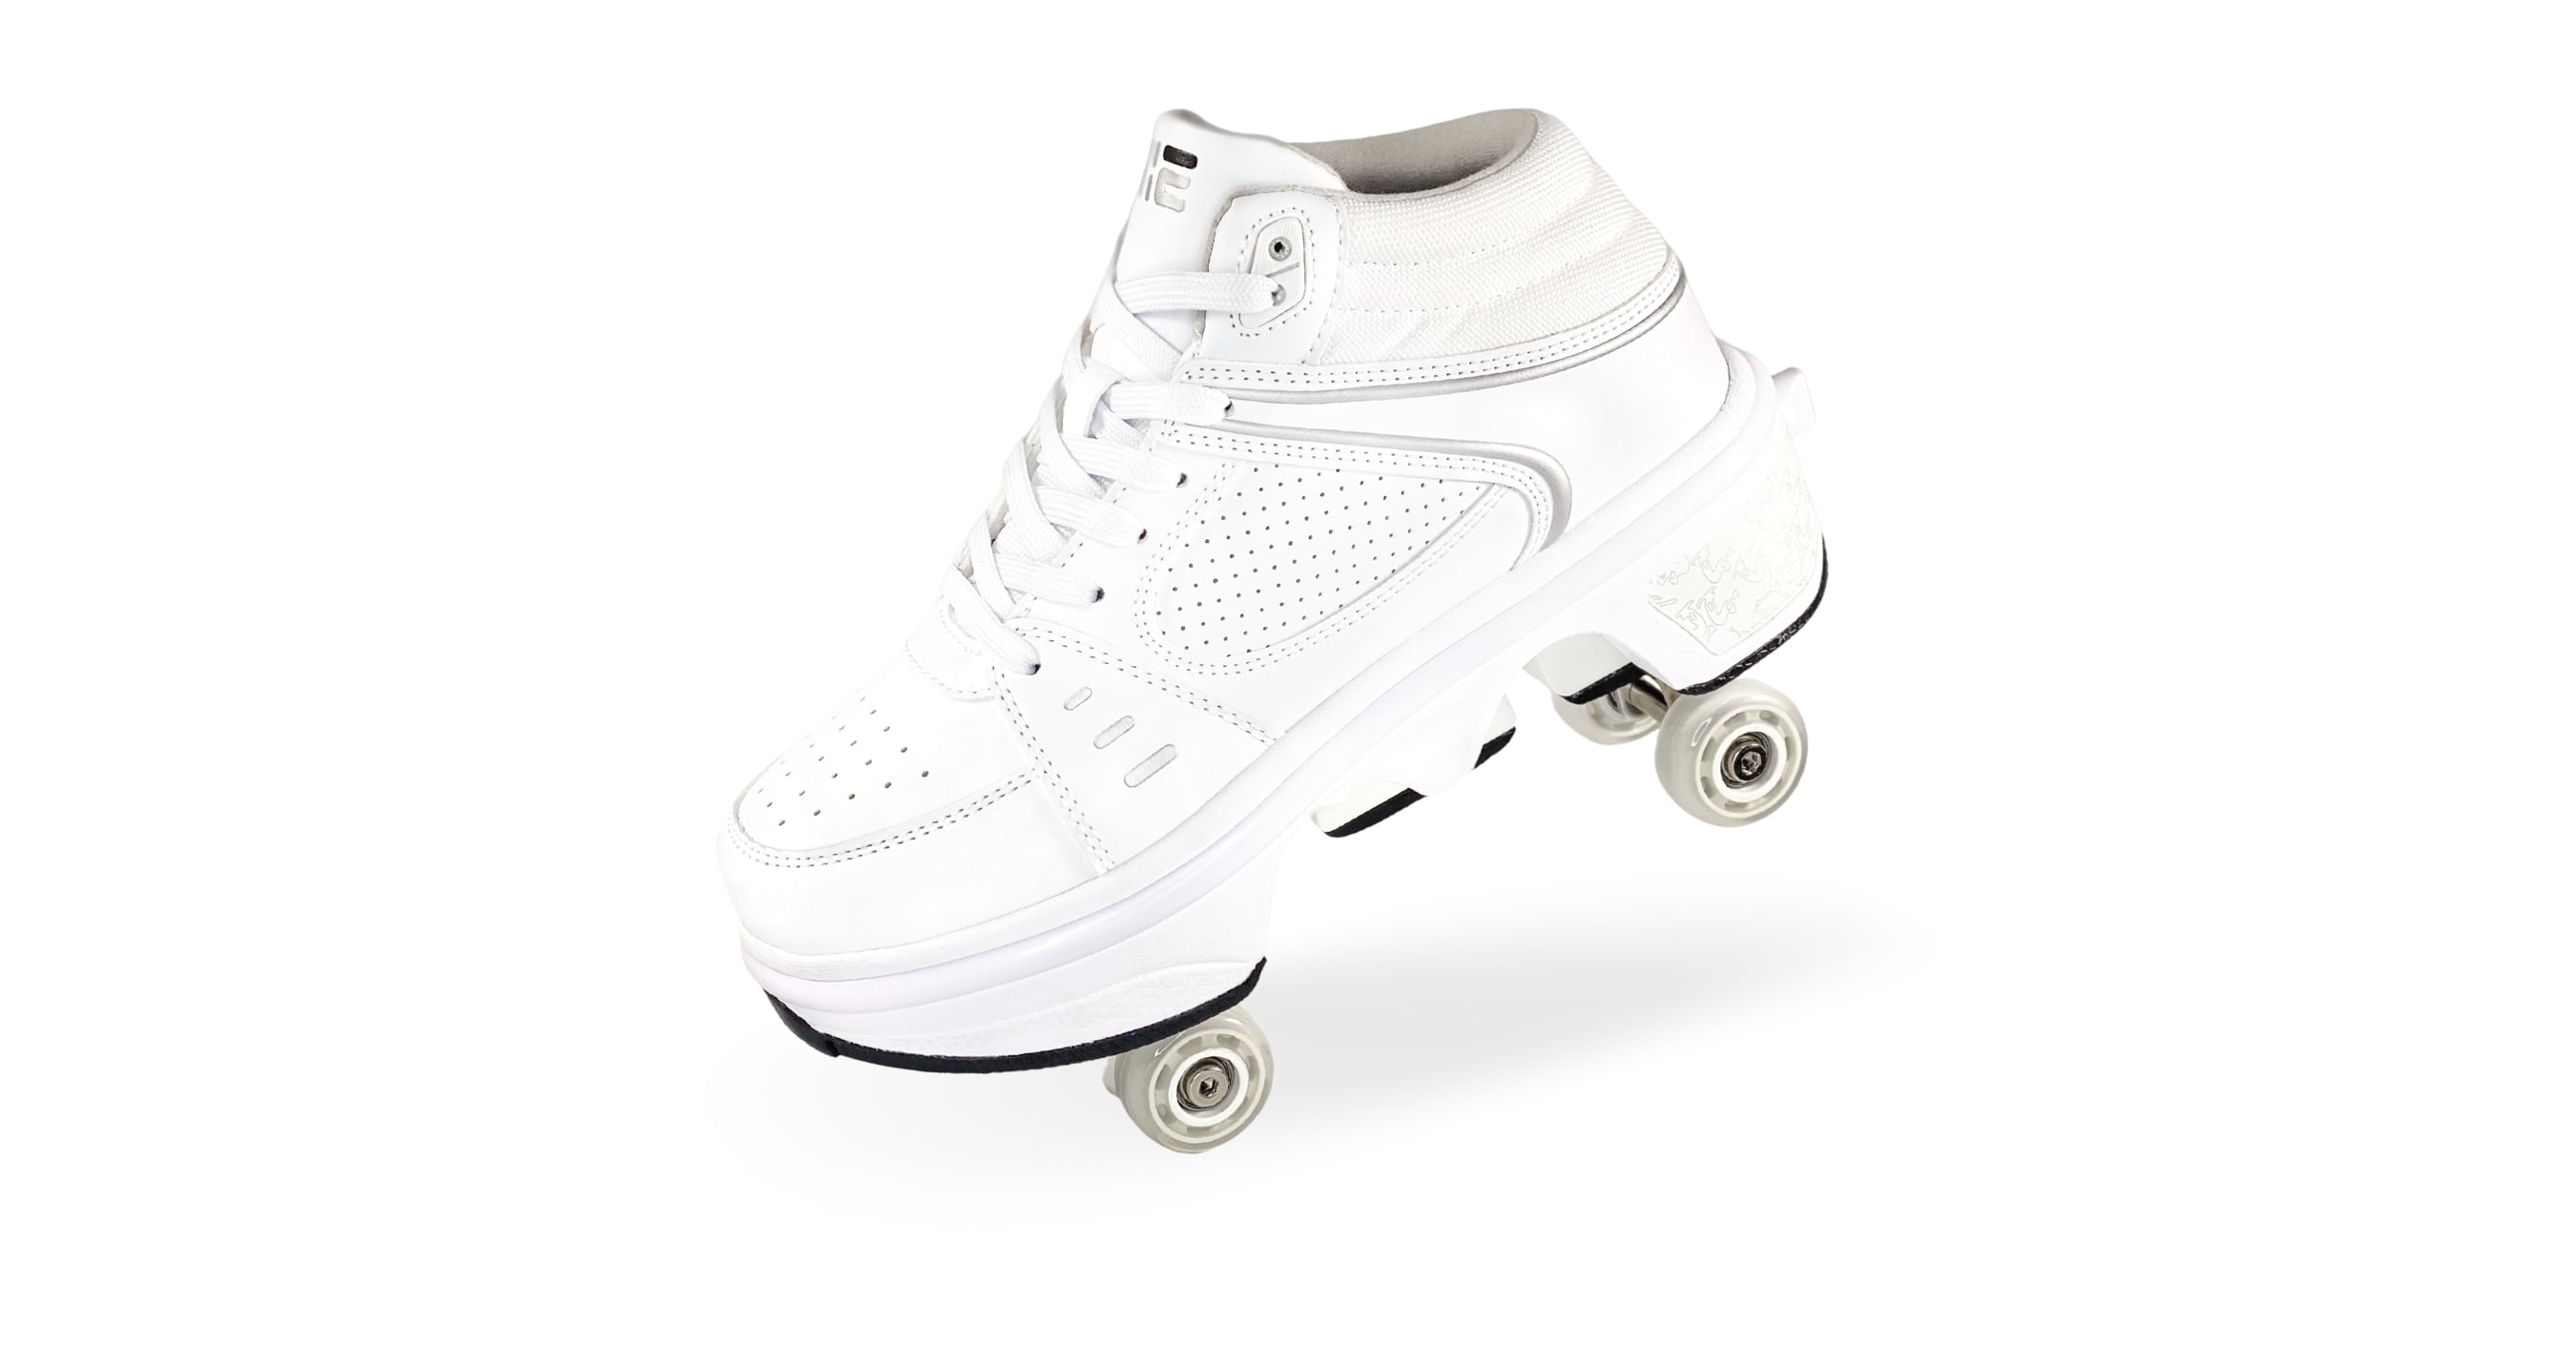 Roller sneakers 2 in 1, Kick Speed - Top White Hight LED (Kid's)